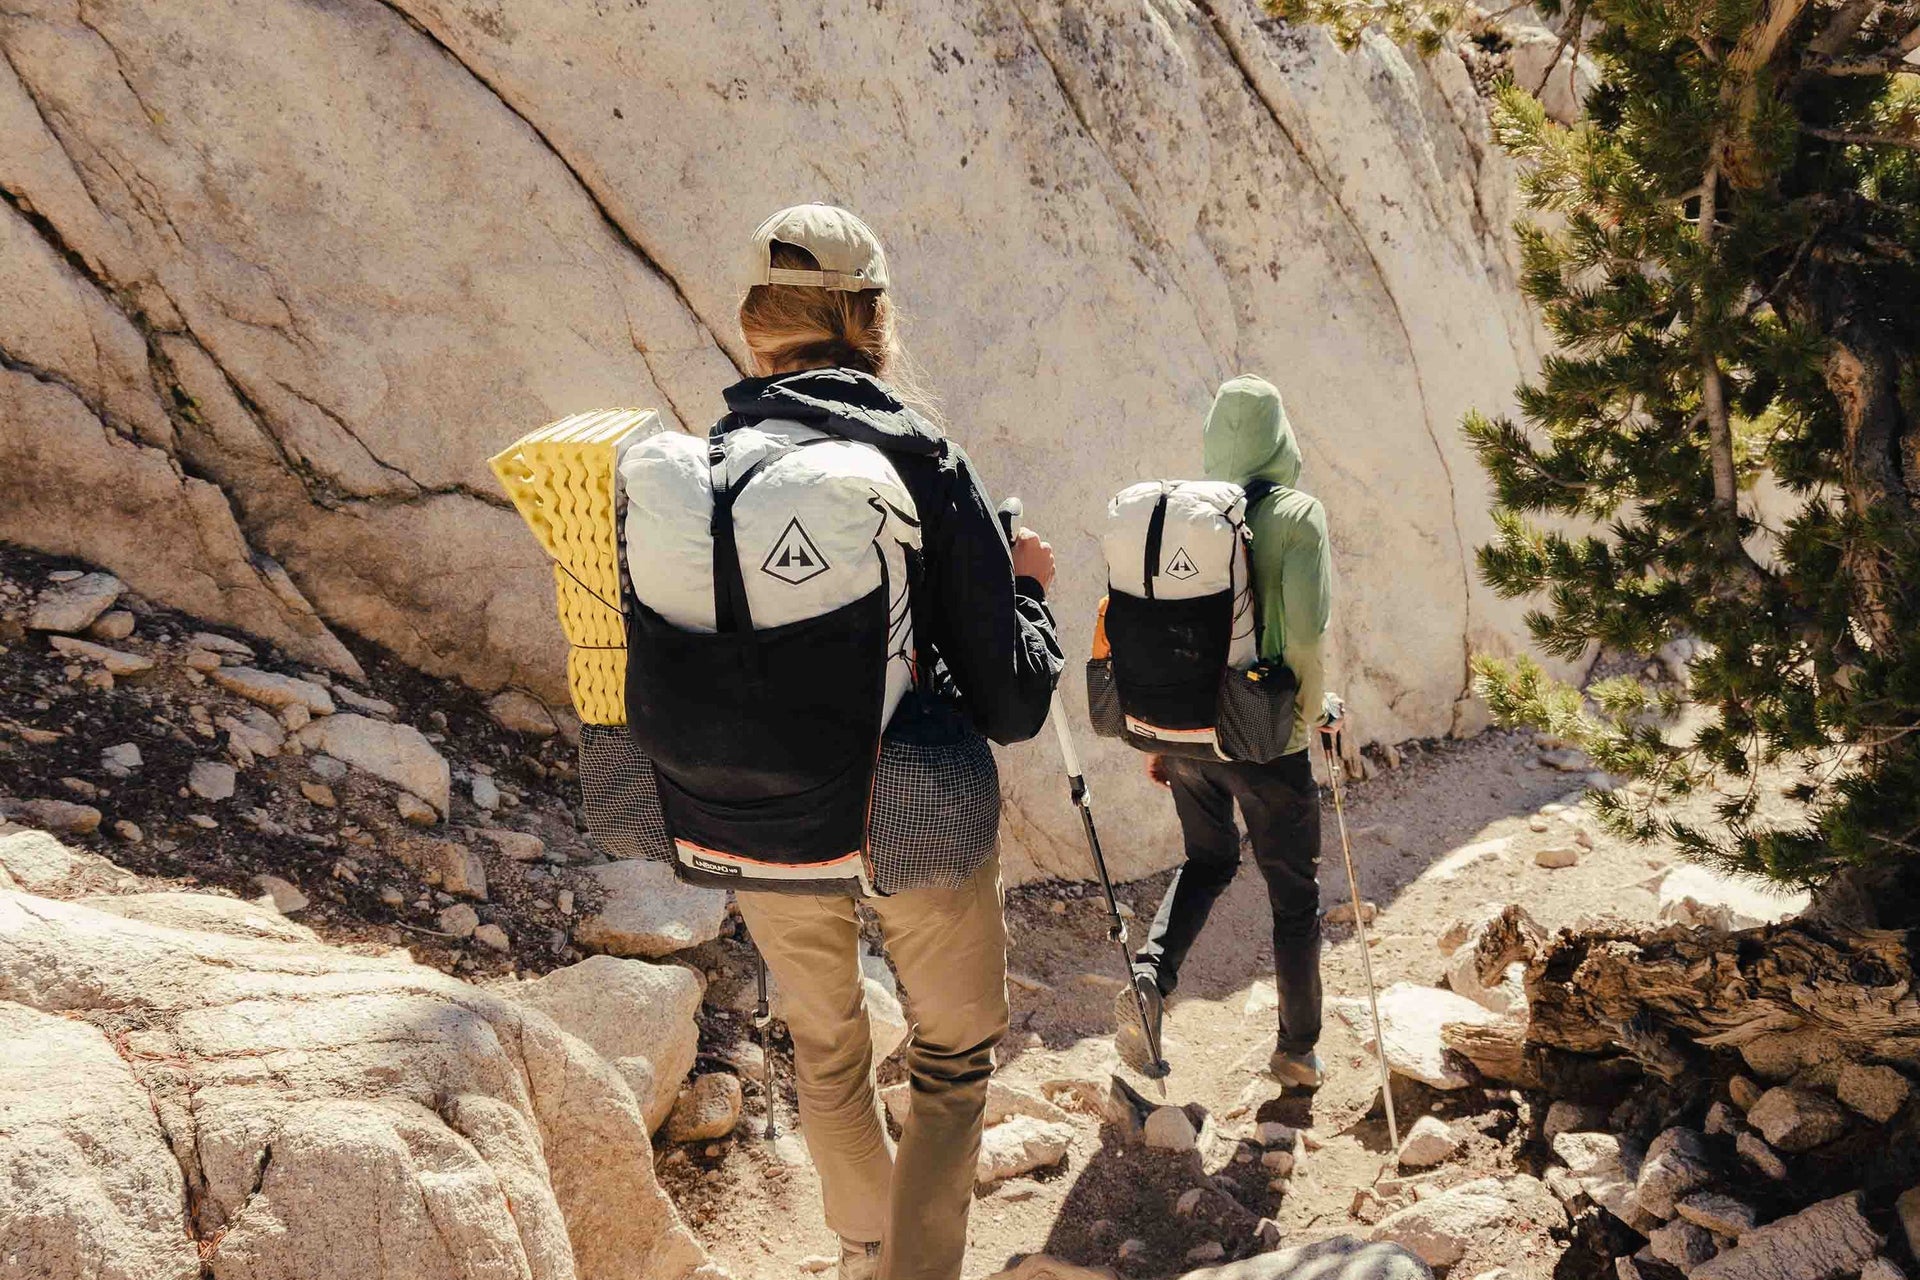 Two people walking up a rocky trail with backpacks.